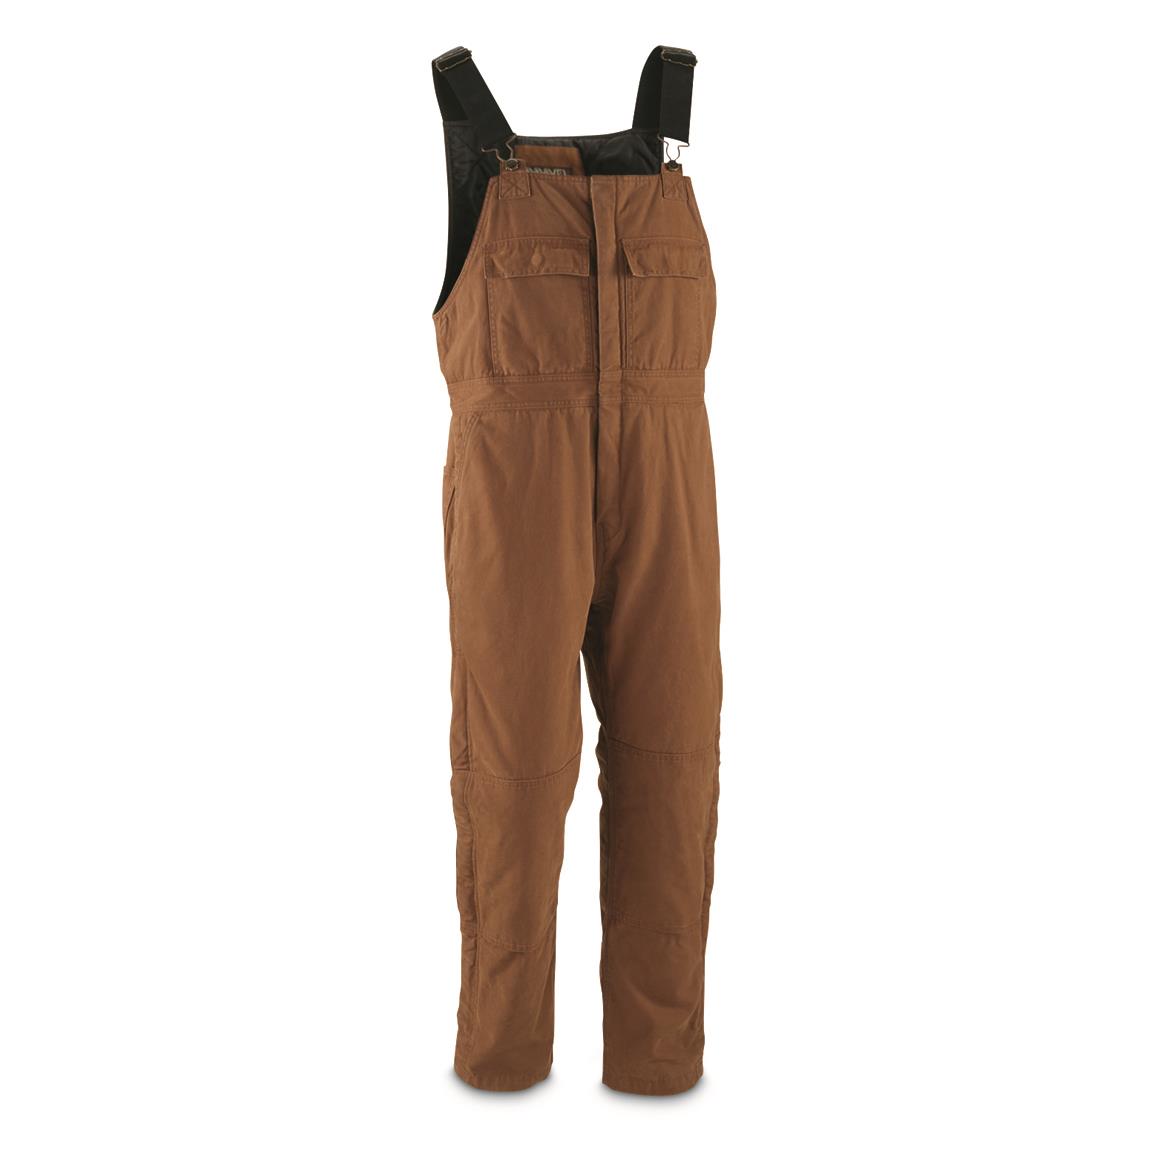 Gravel Gear Men's Insulated Duck Overalls with Teflon, Brown